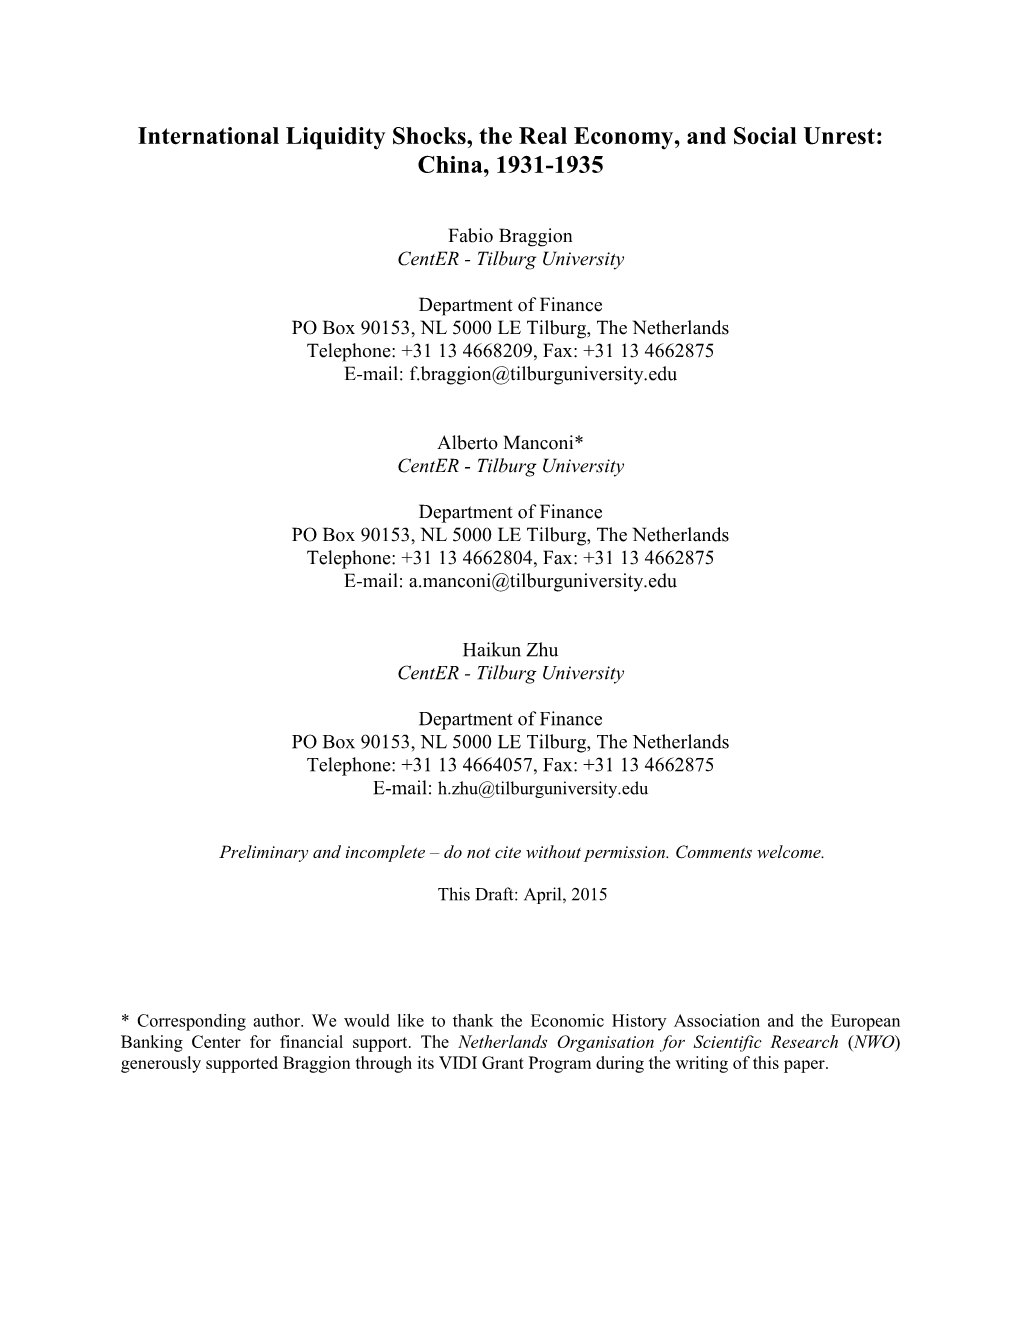 International Liquidity Shocks, the Real Economy, and Social Unrest: China, 1931-1935